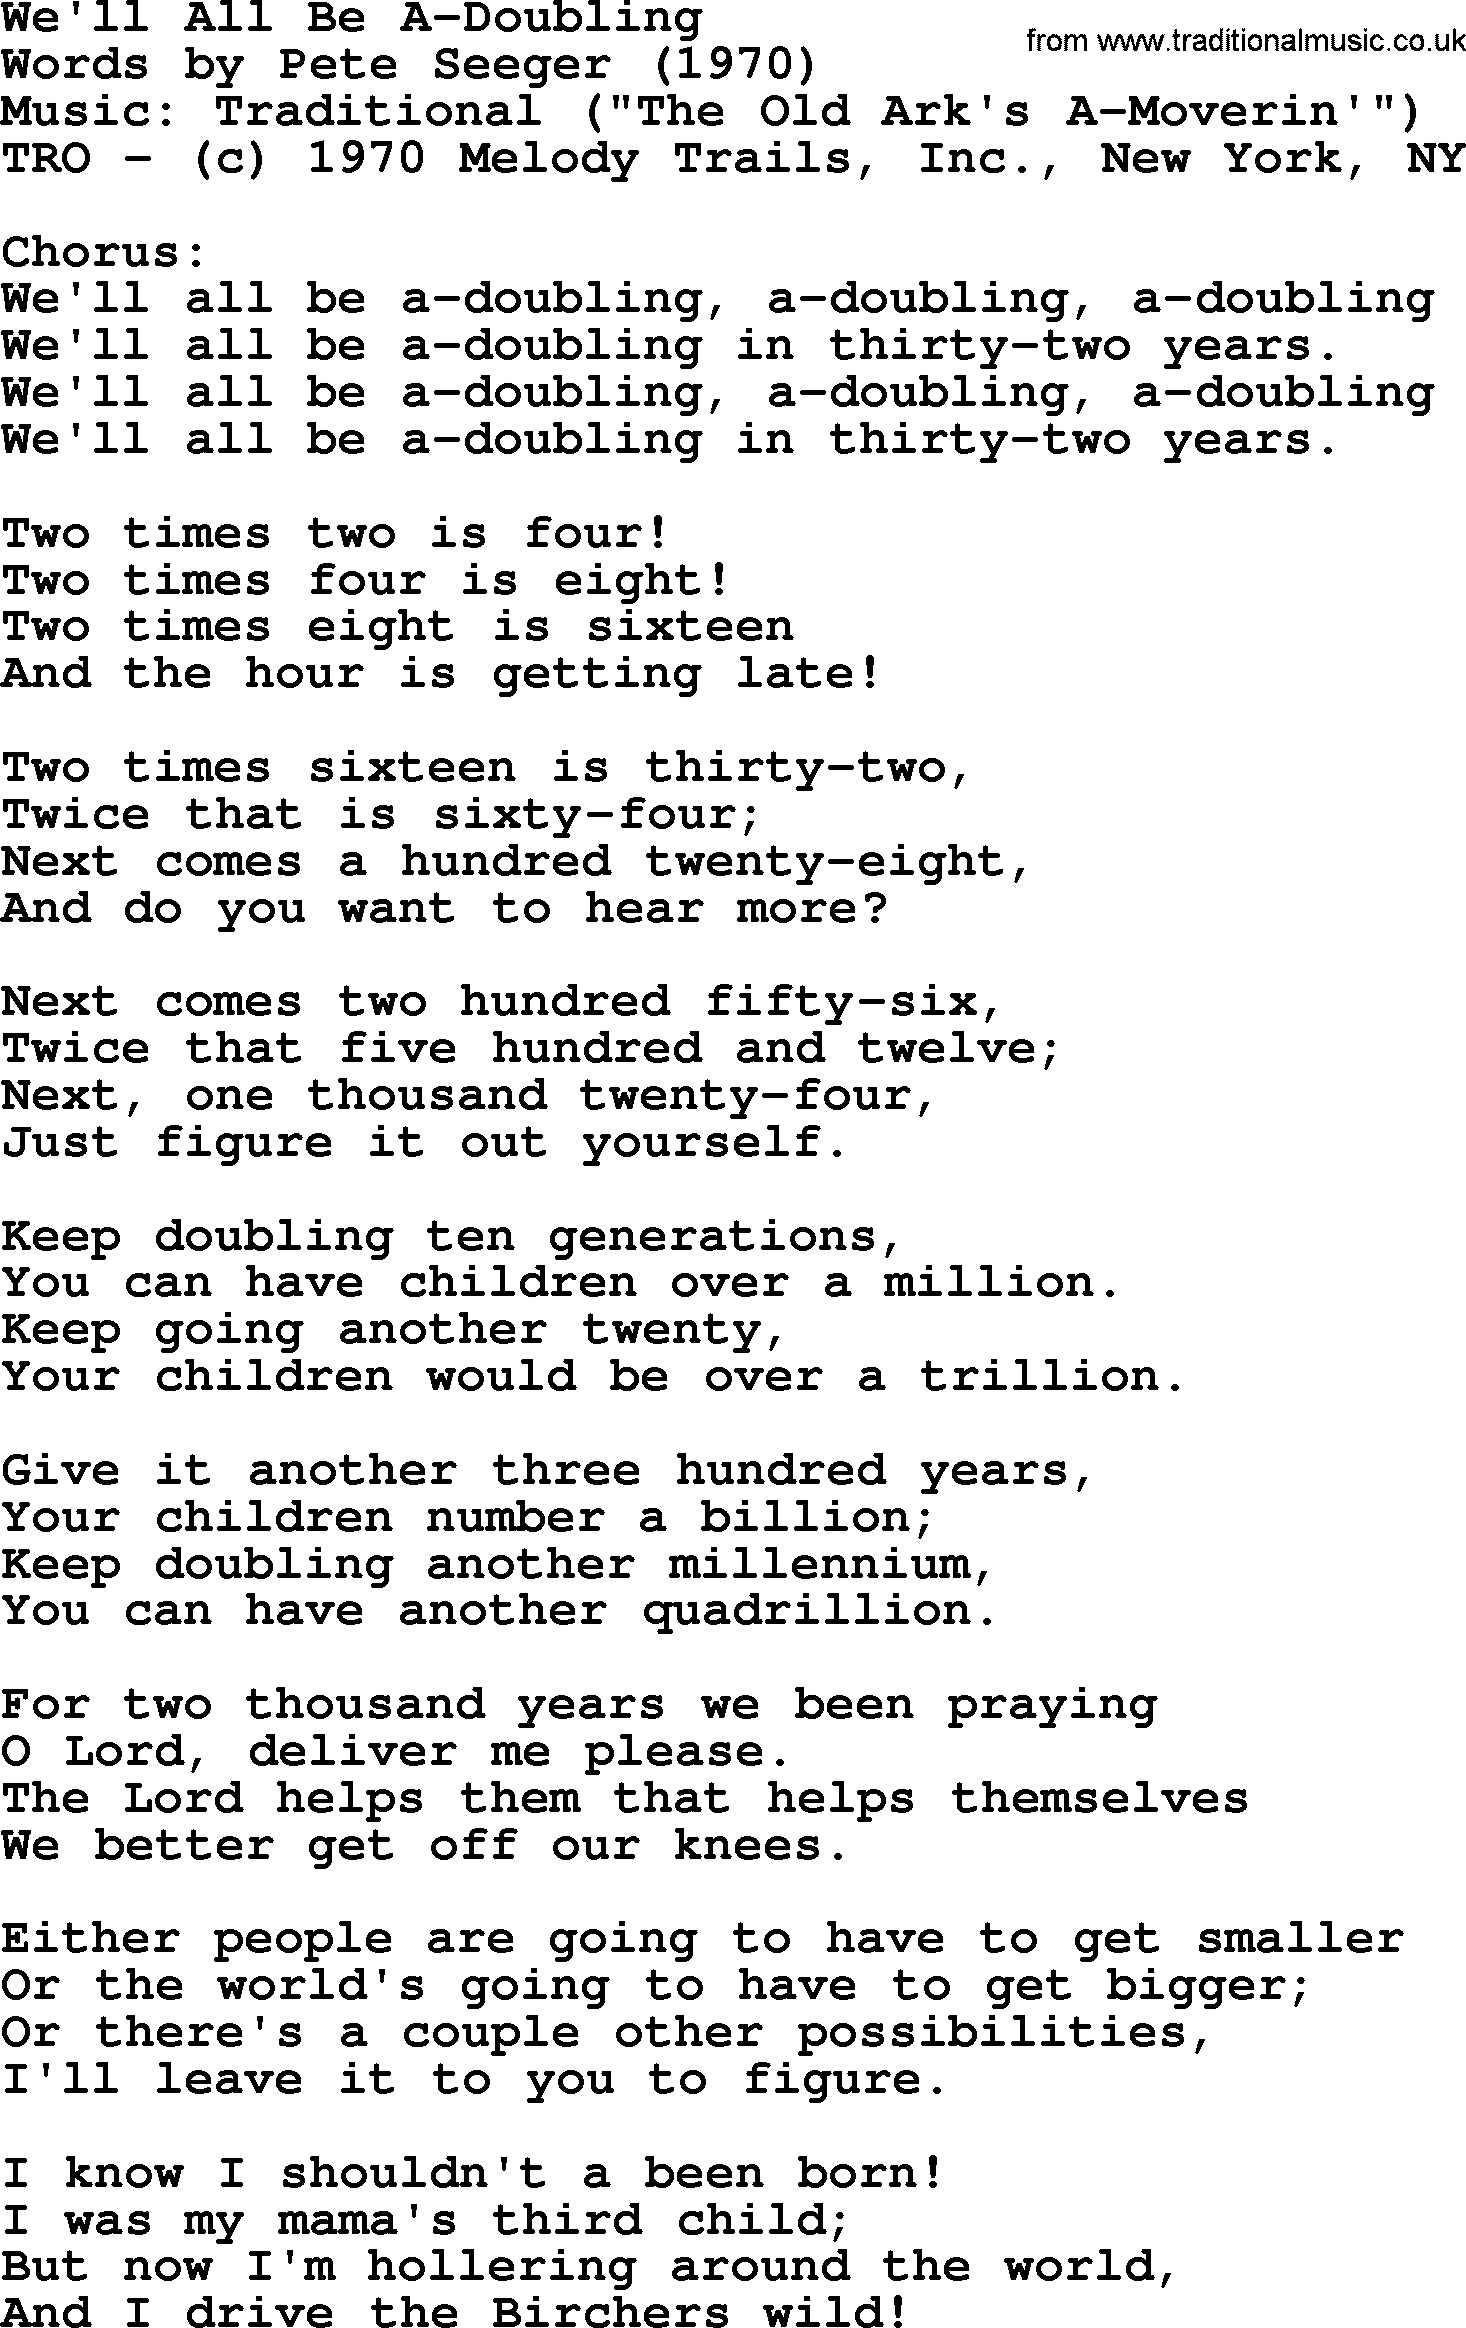 Pete Seeger song We'll All Be A Doubling-Pete-Seeger.txt lyrics